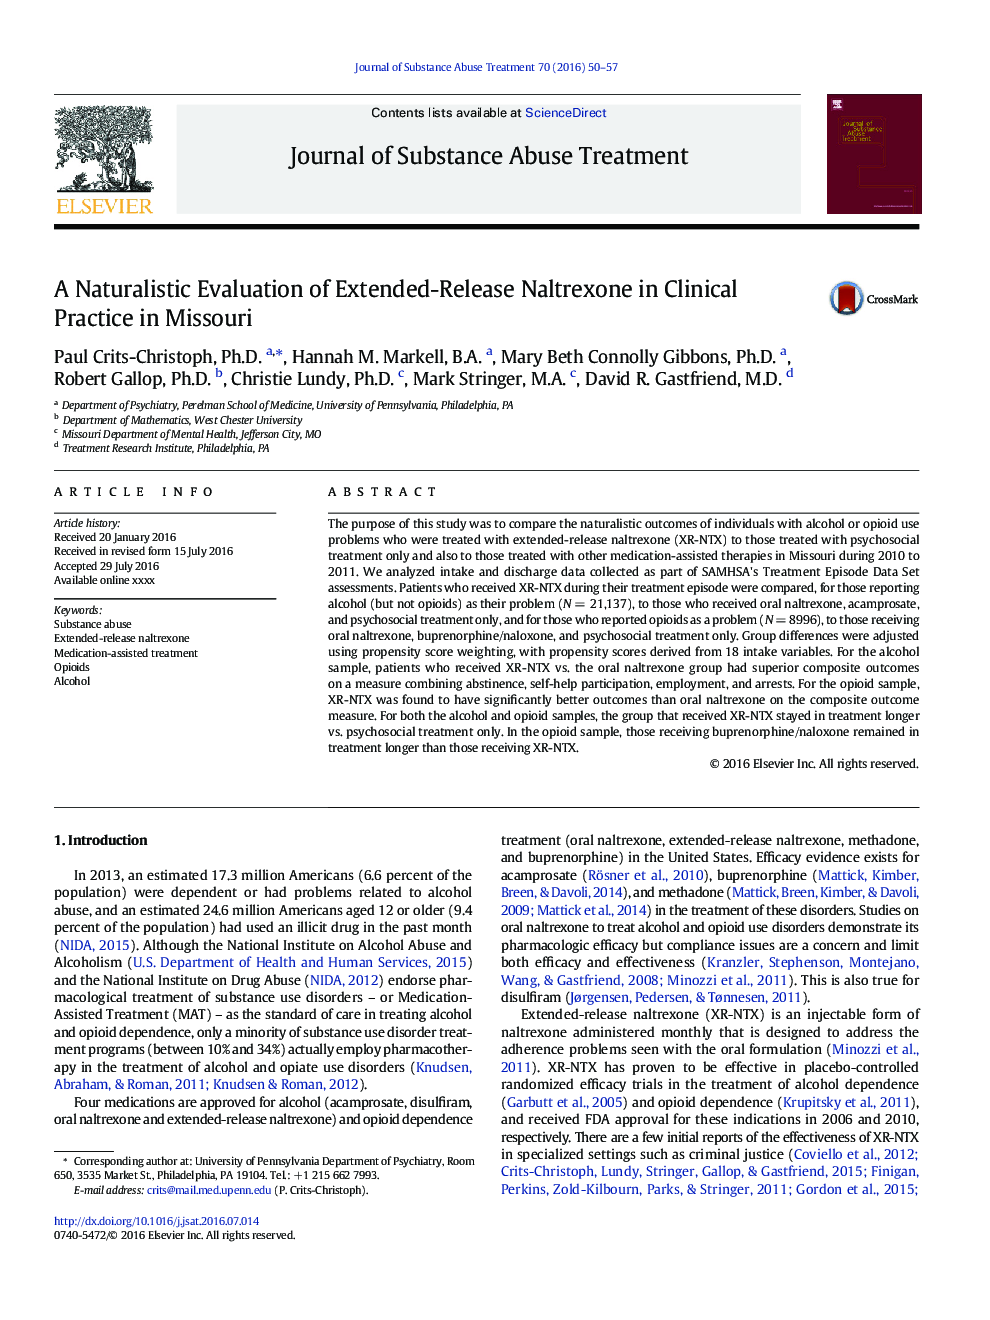 A Naturalistic Evaluation of Extended-Release Naltrexone in Clinical Practice in Missouri